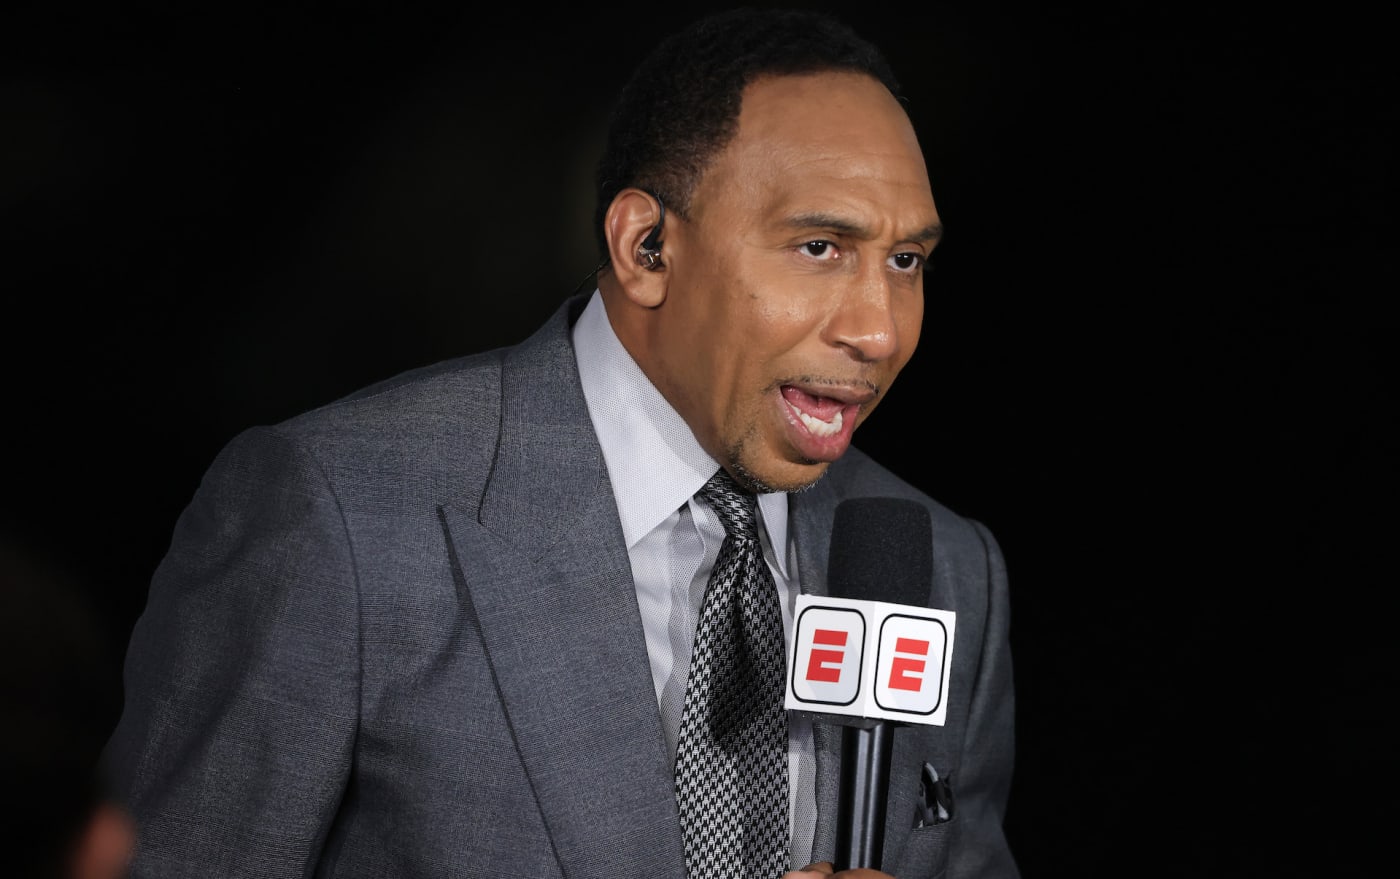 Stephen A. Smith on ESPN set during 2021 NBA Finals